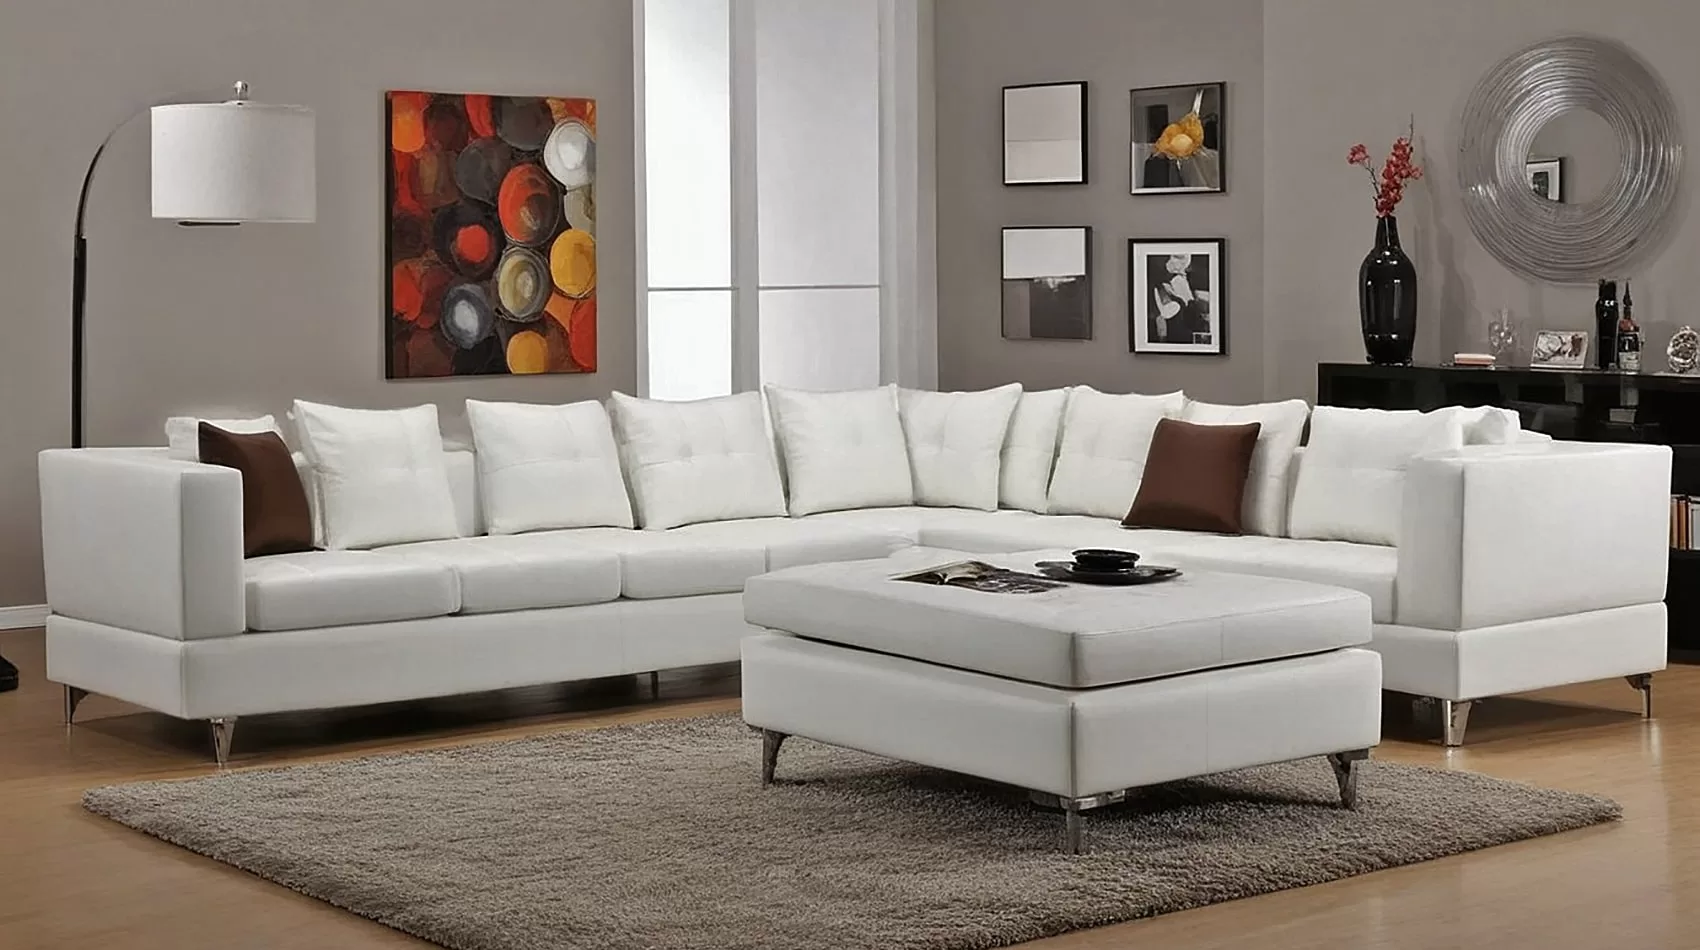 L Shaped White Couch | L Shaped White Sofa